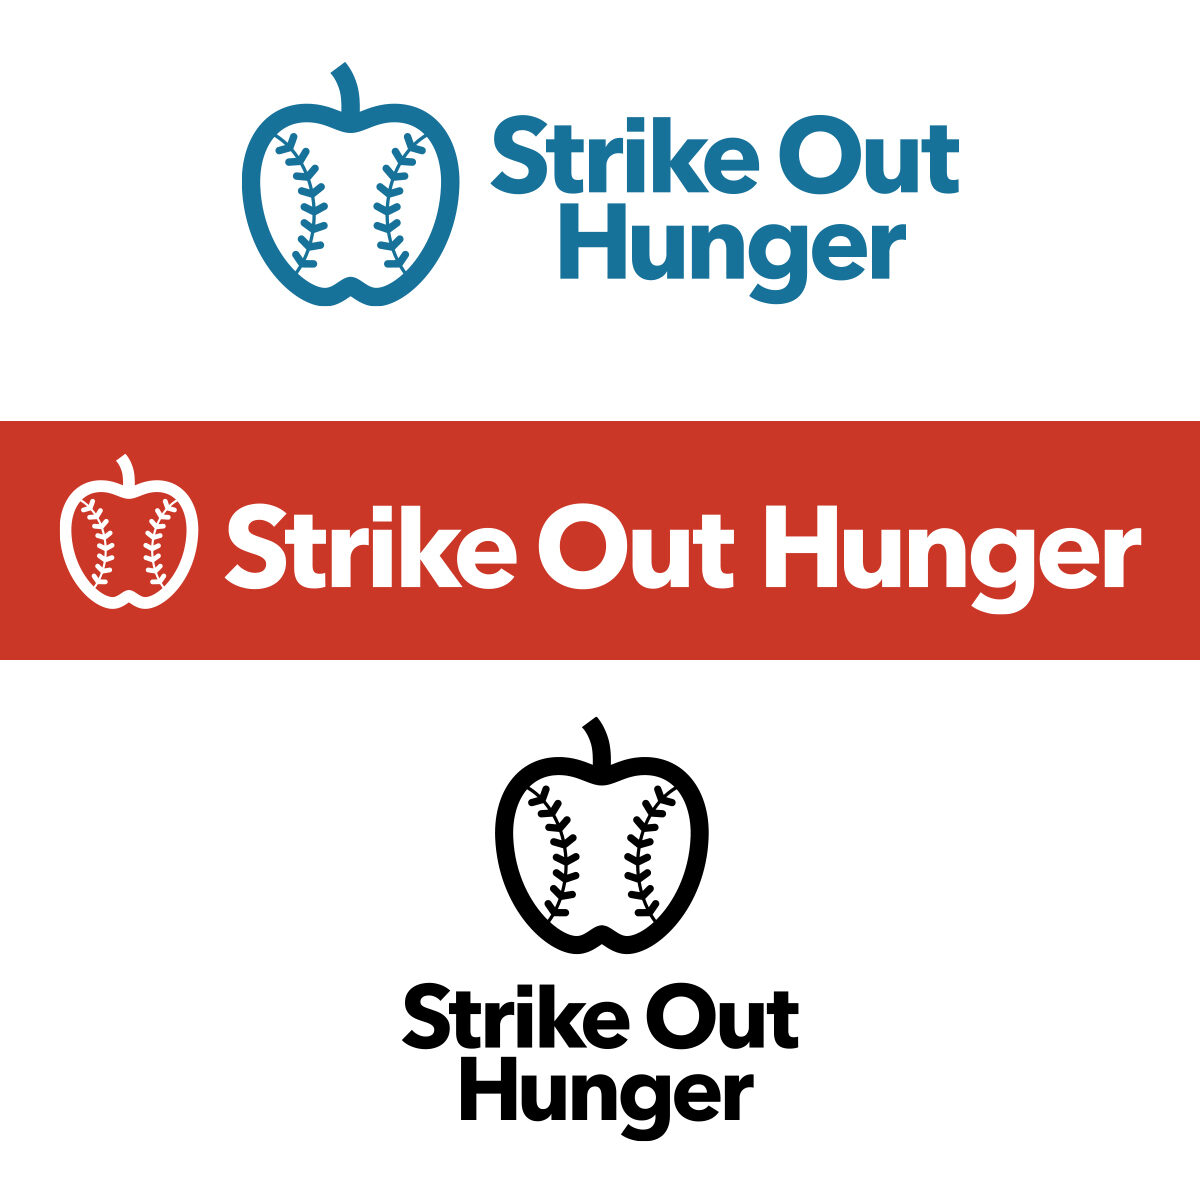 Strike Out Hunger logos in blue white and black